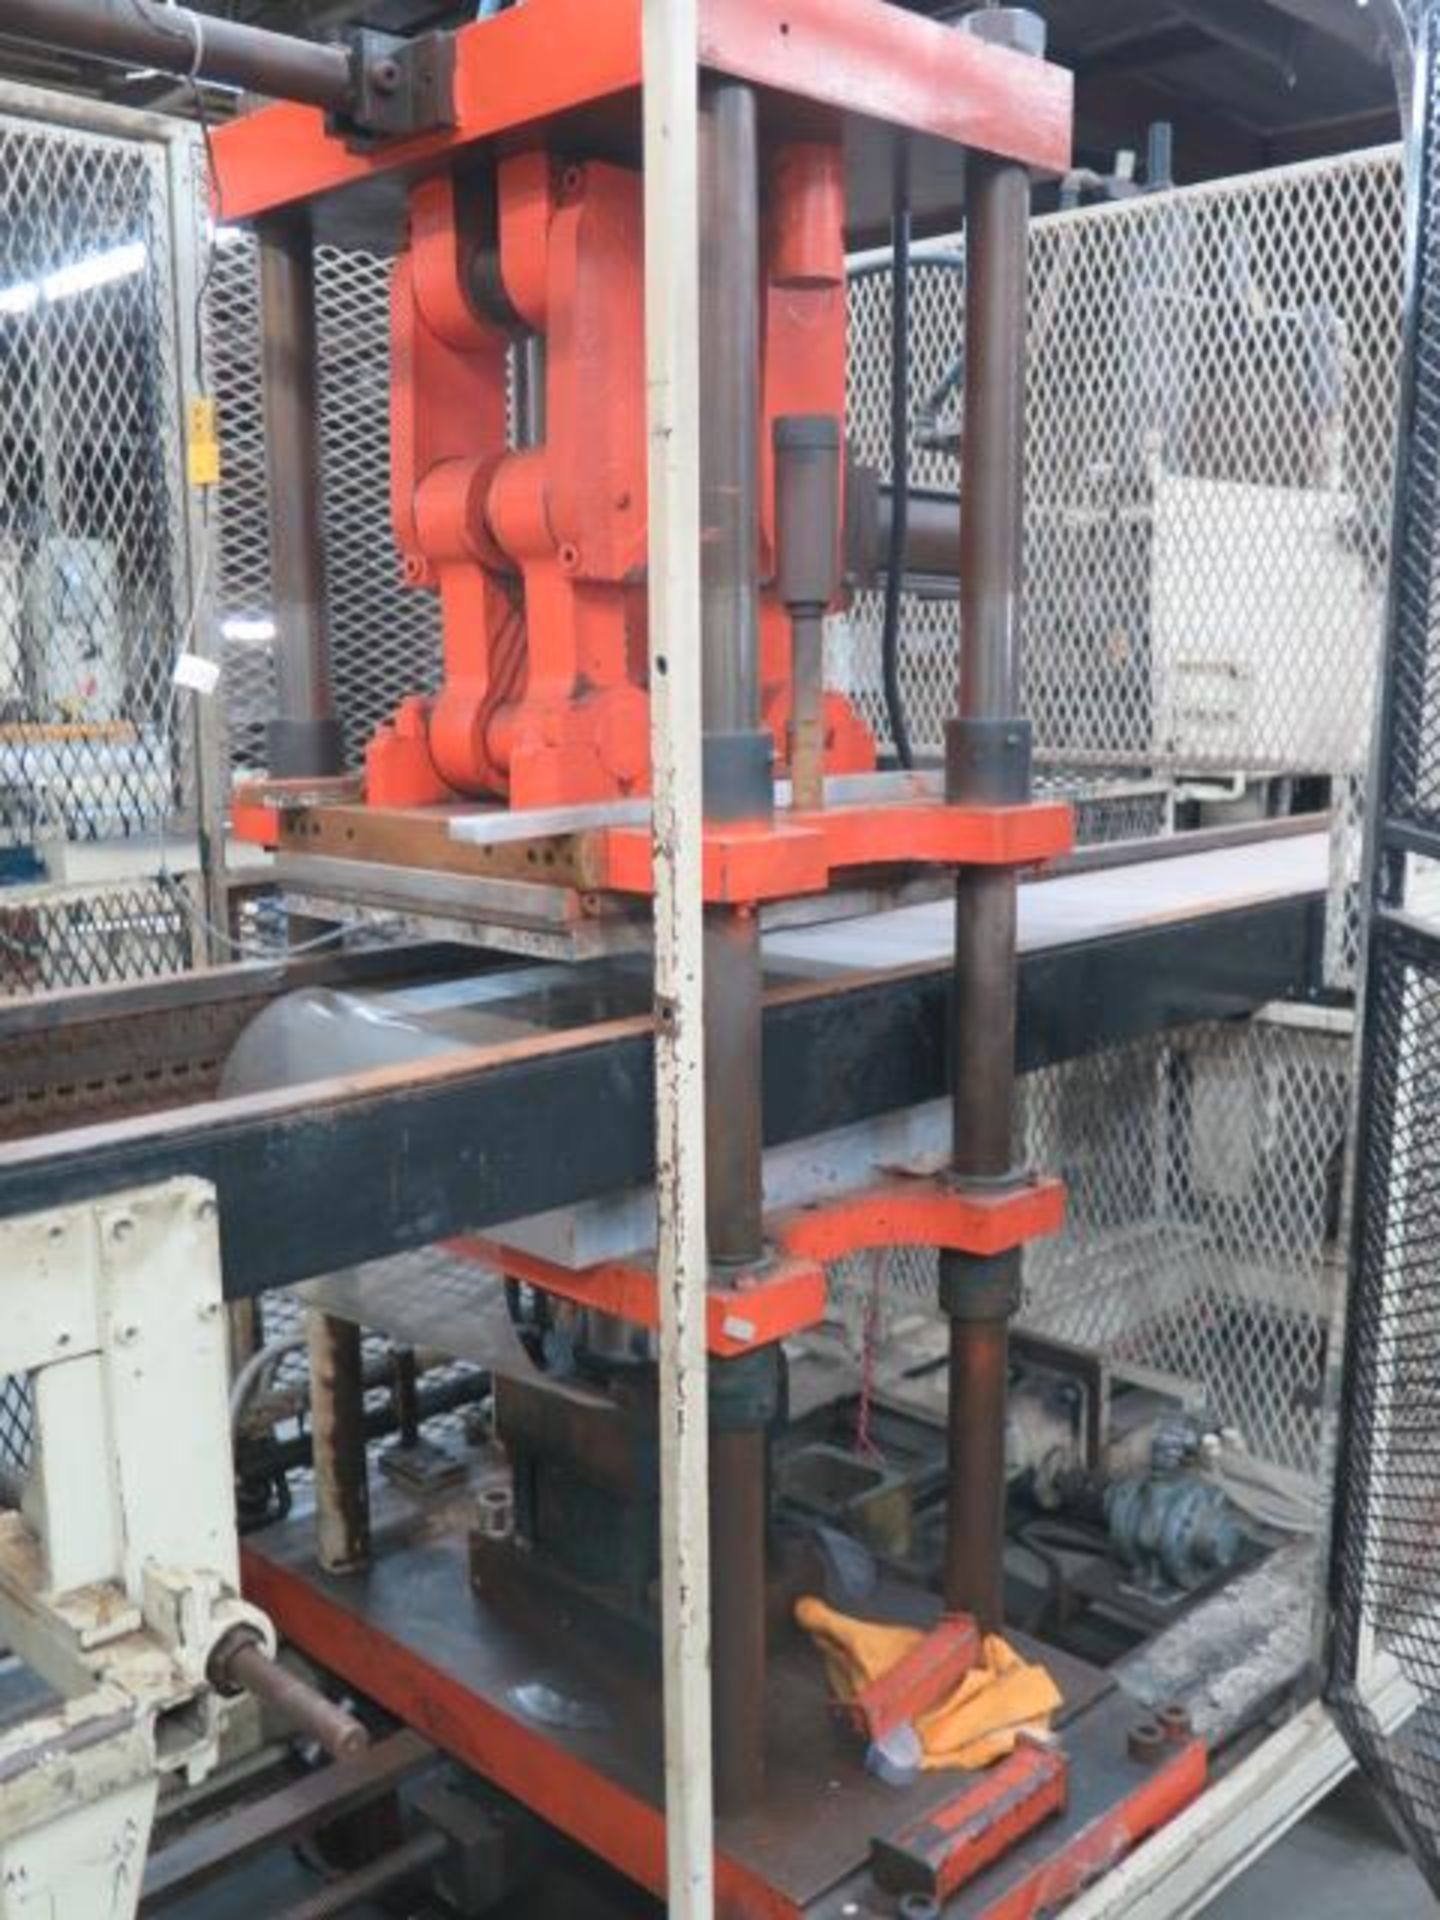 Sencorp Systems Thermoforming w/ Sencorp Controls, Film Preheater, 10” x 30” Vacuum, SOLD AS IS - Image 20 of 30